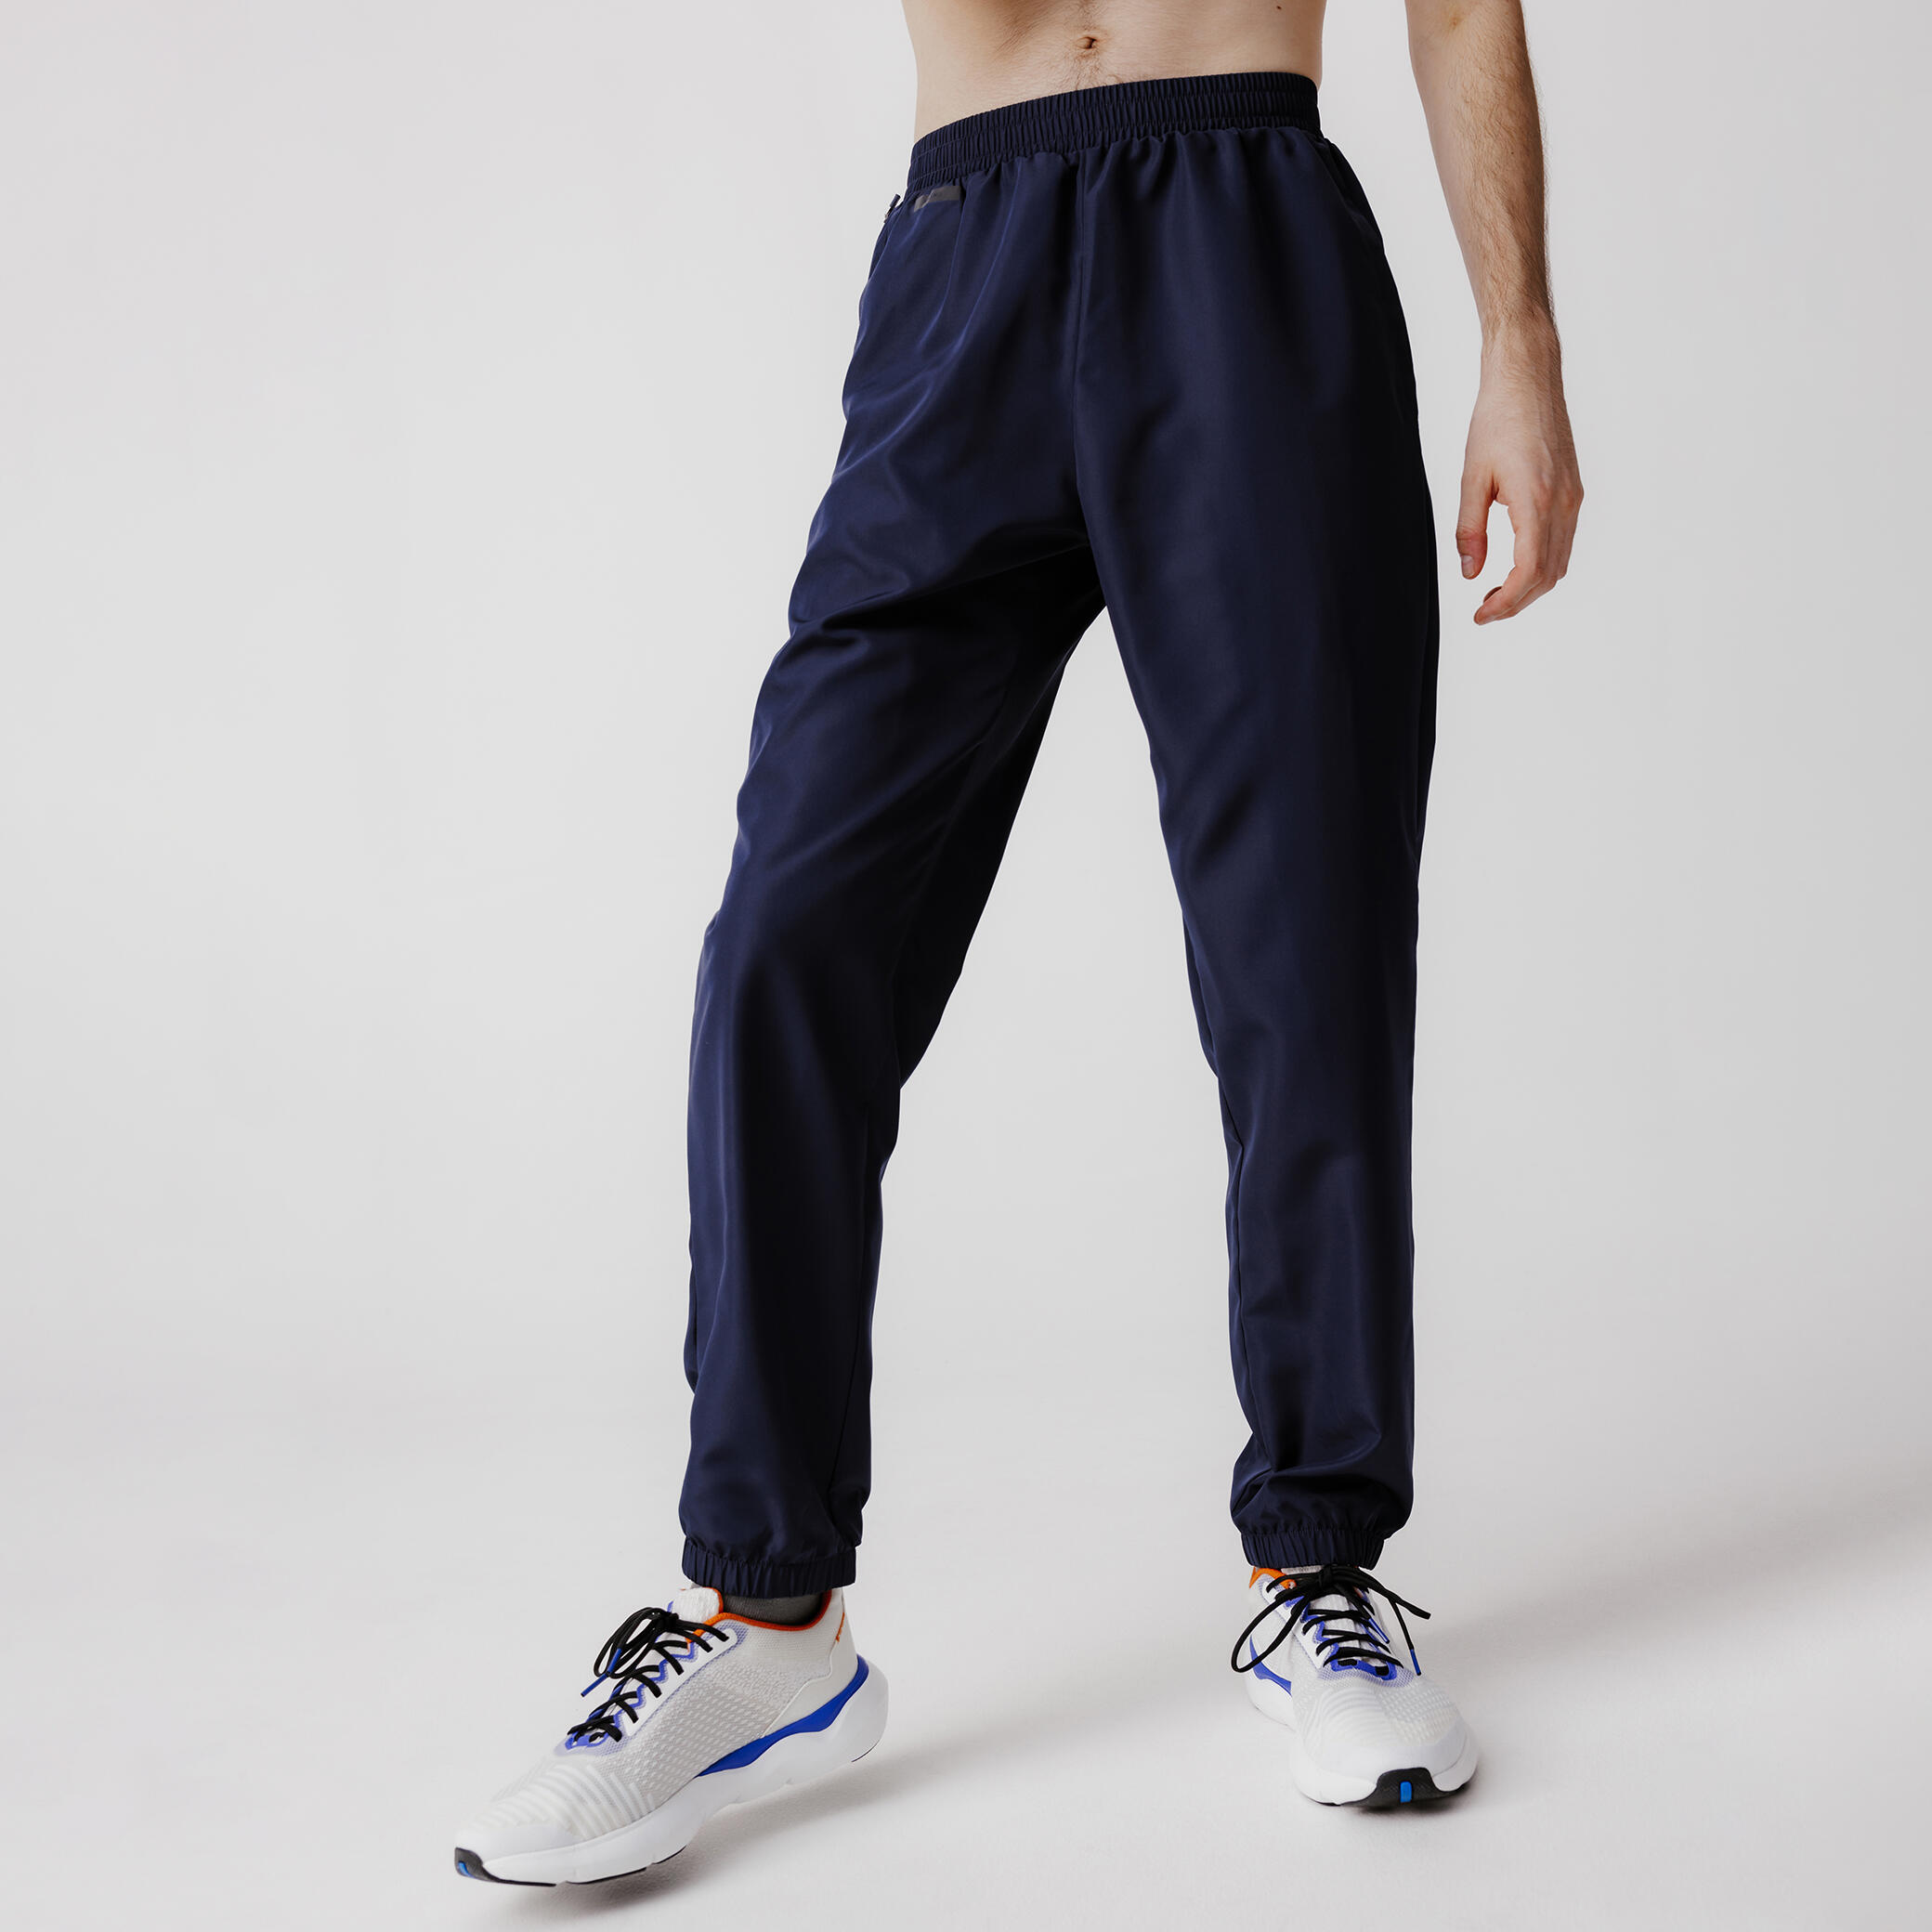 Track Pant  Navy Blue colour buy online in India at cheap price  Scholar  Shoppe